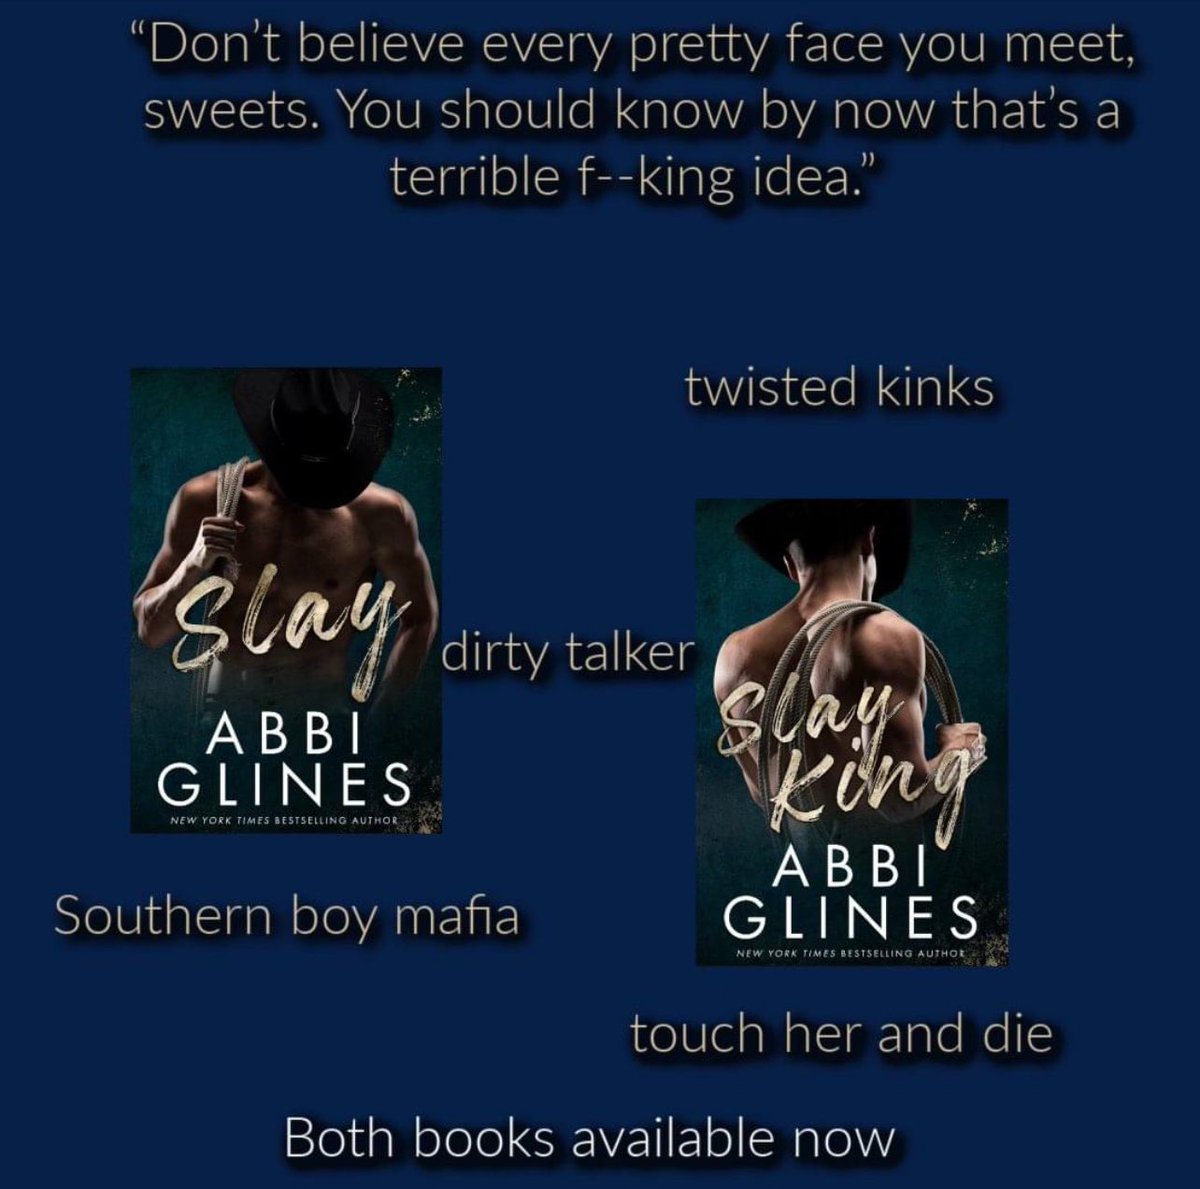 The mafia in the south is just better. Now it's time to go read 😉 𝐒𝐥𝐚𝐲 geni.us/AGSlay 𝐒𝐥𝐚𝐲 𝐊𝐢𝐧𝐠 geni.us/slayking